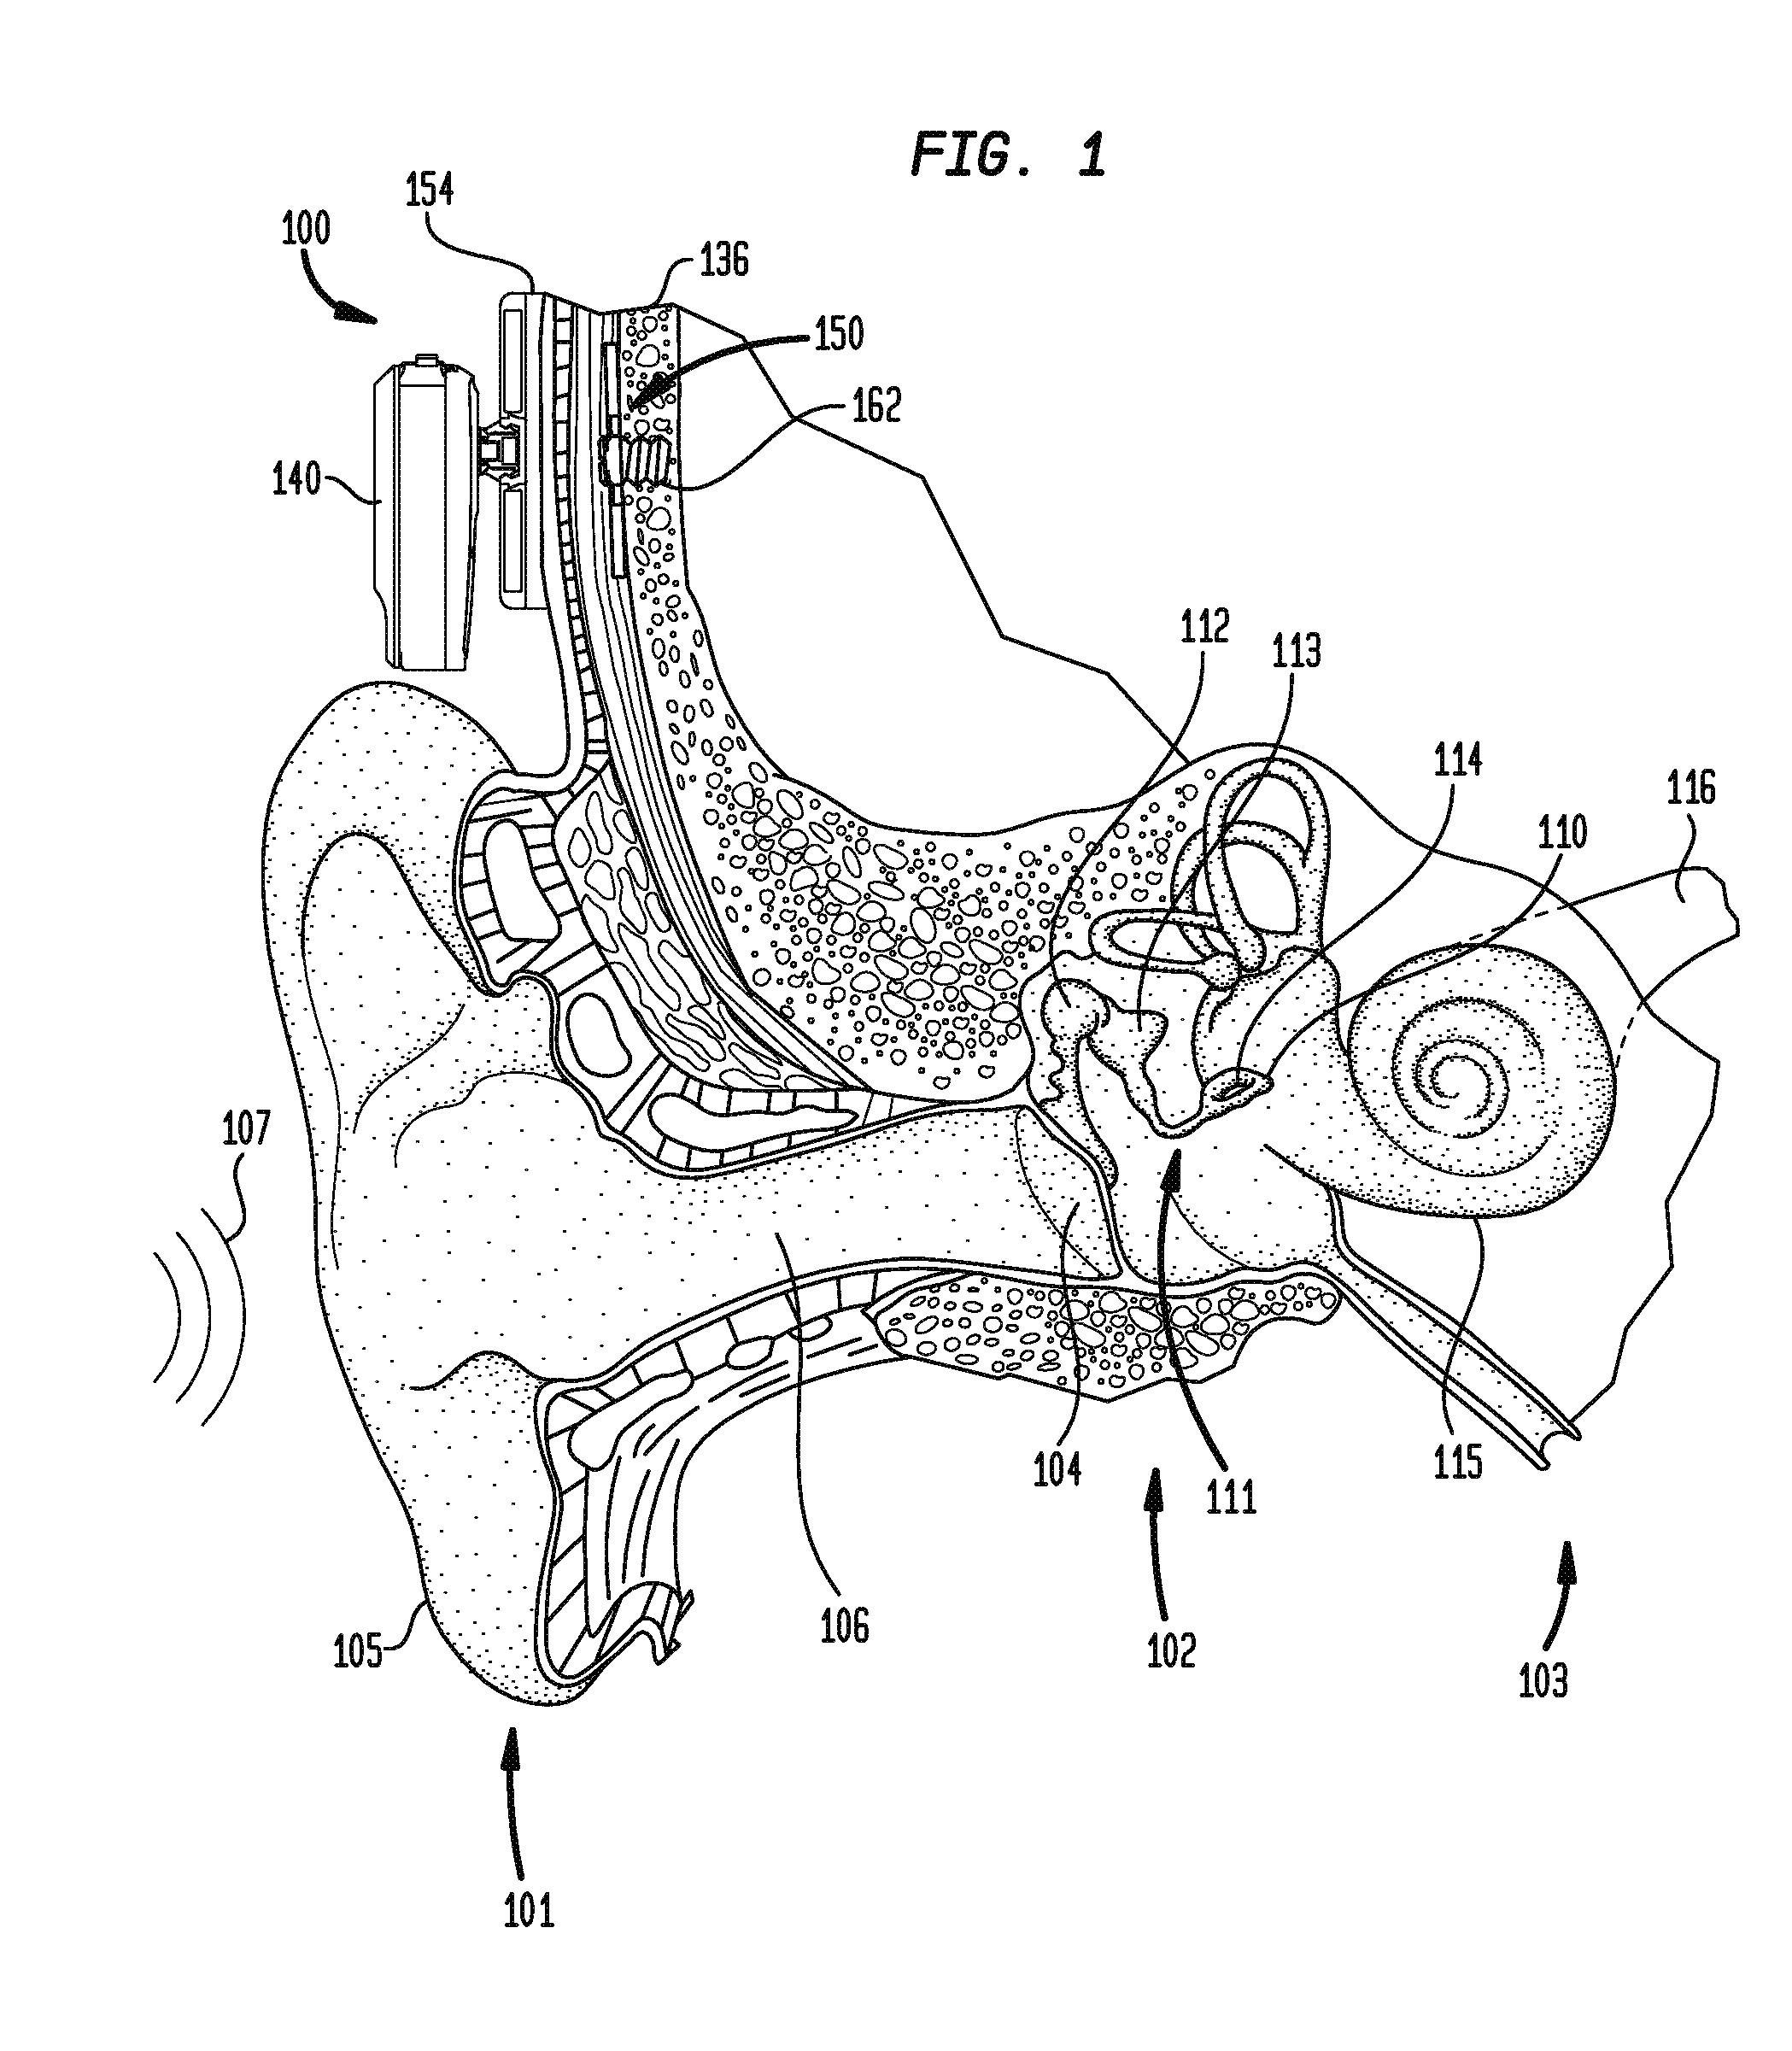 Conformable pad bone conduction device